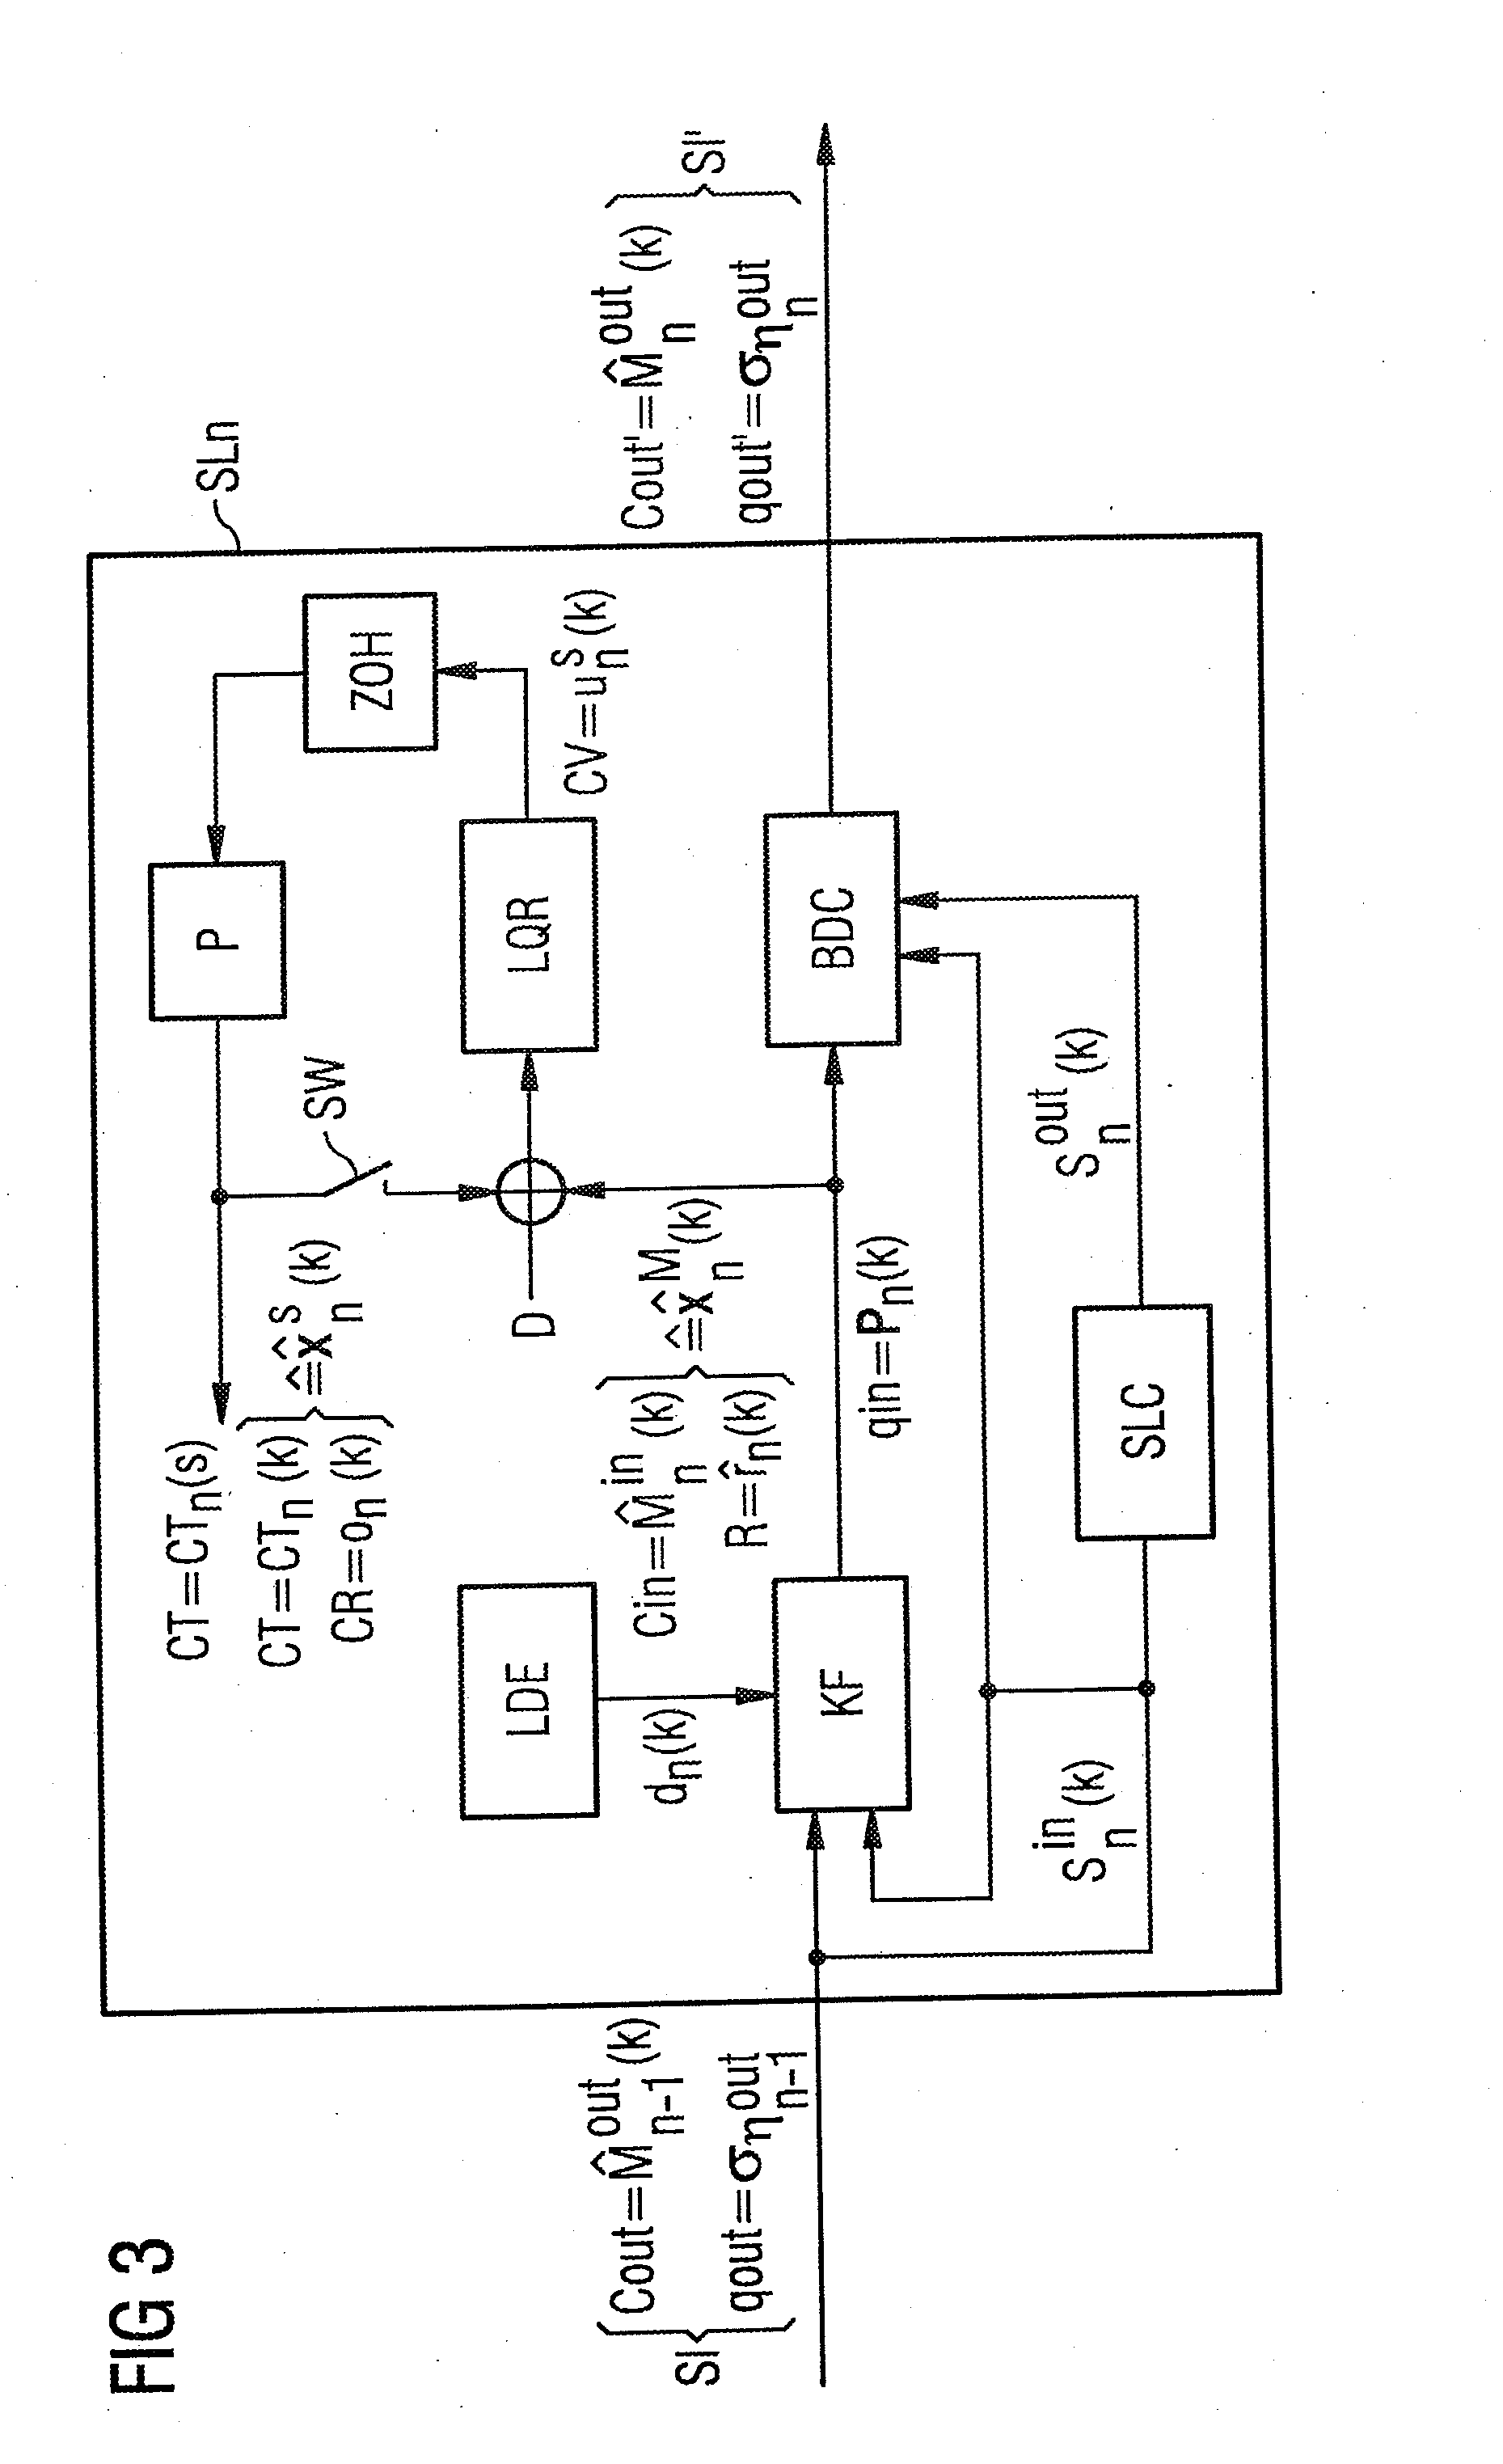 Method for Time Synchronization in a Communications Network